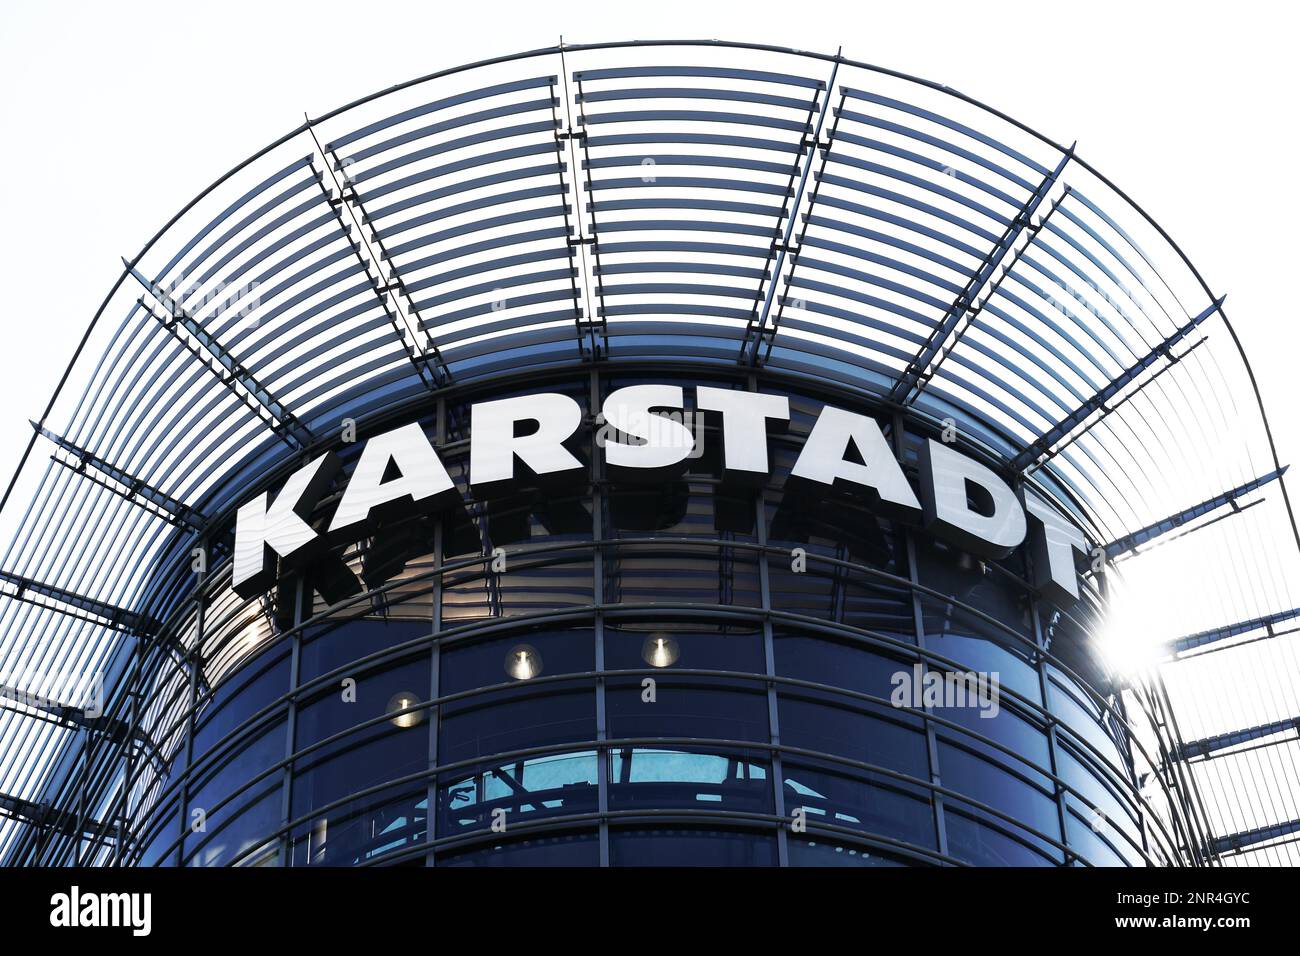 Hannover, Germany - August 2, 2018: Karstadt department store logo on building facade in downtown Hannover Stock Photo